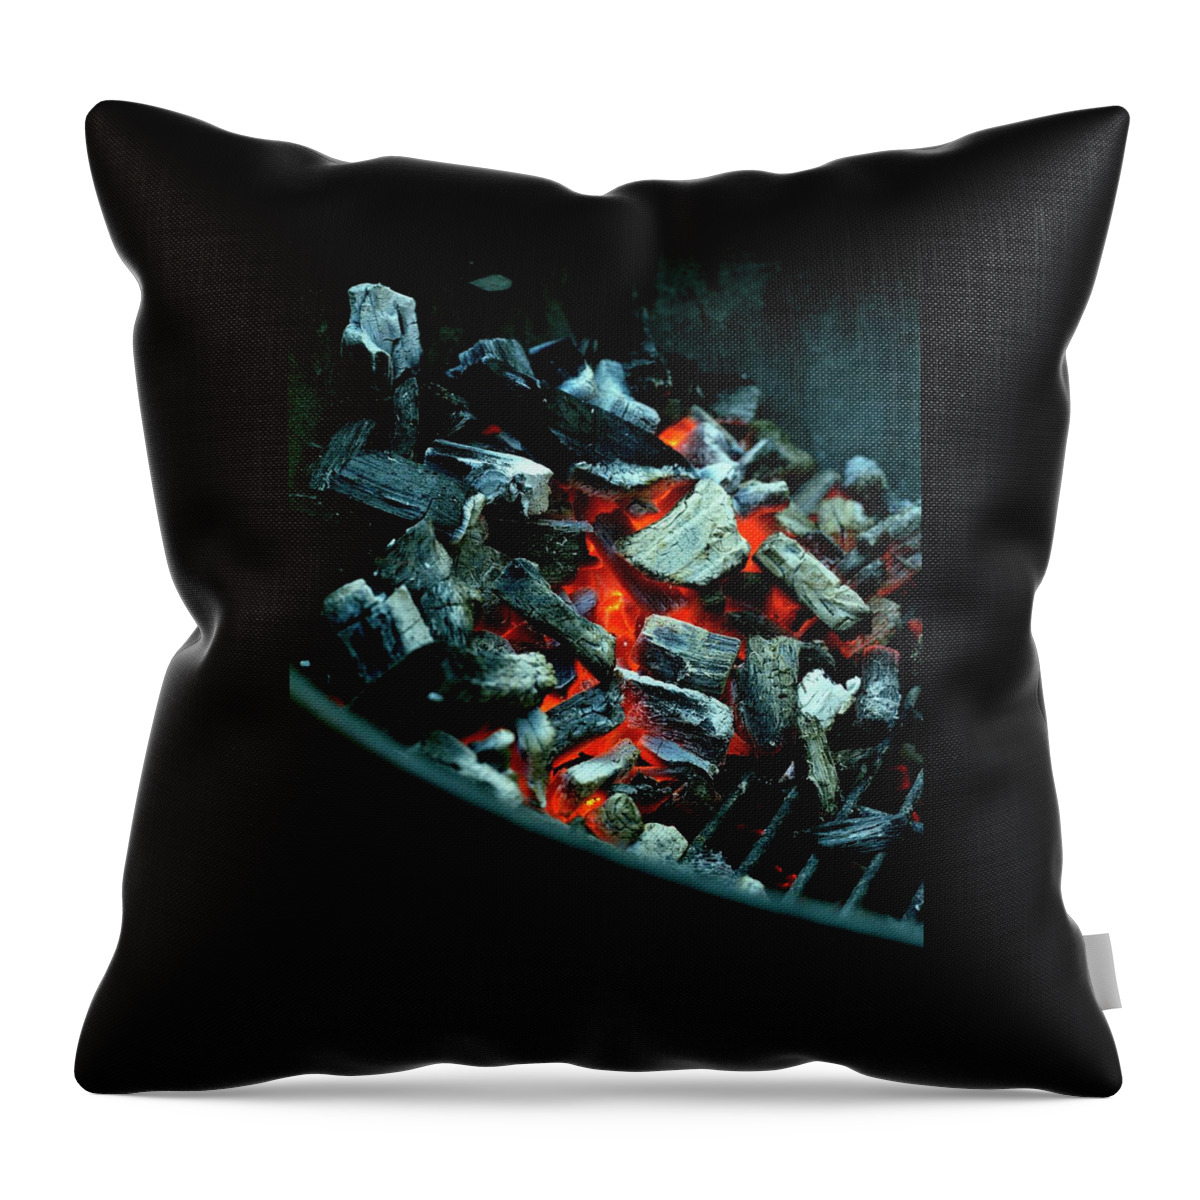 Charcoal Burning On A Grill Throw Pillow